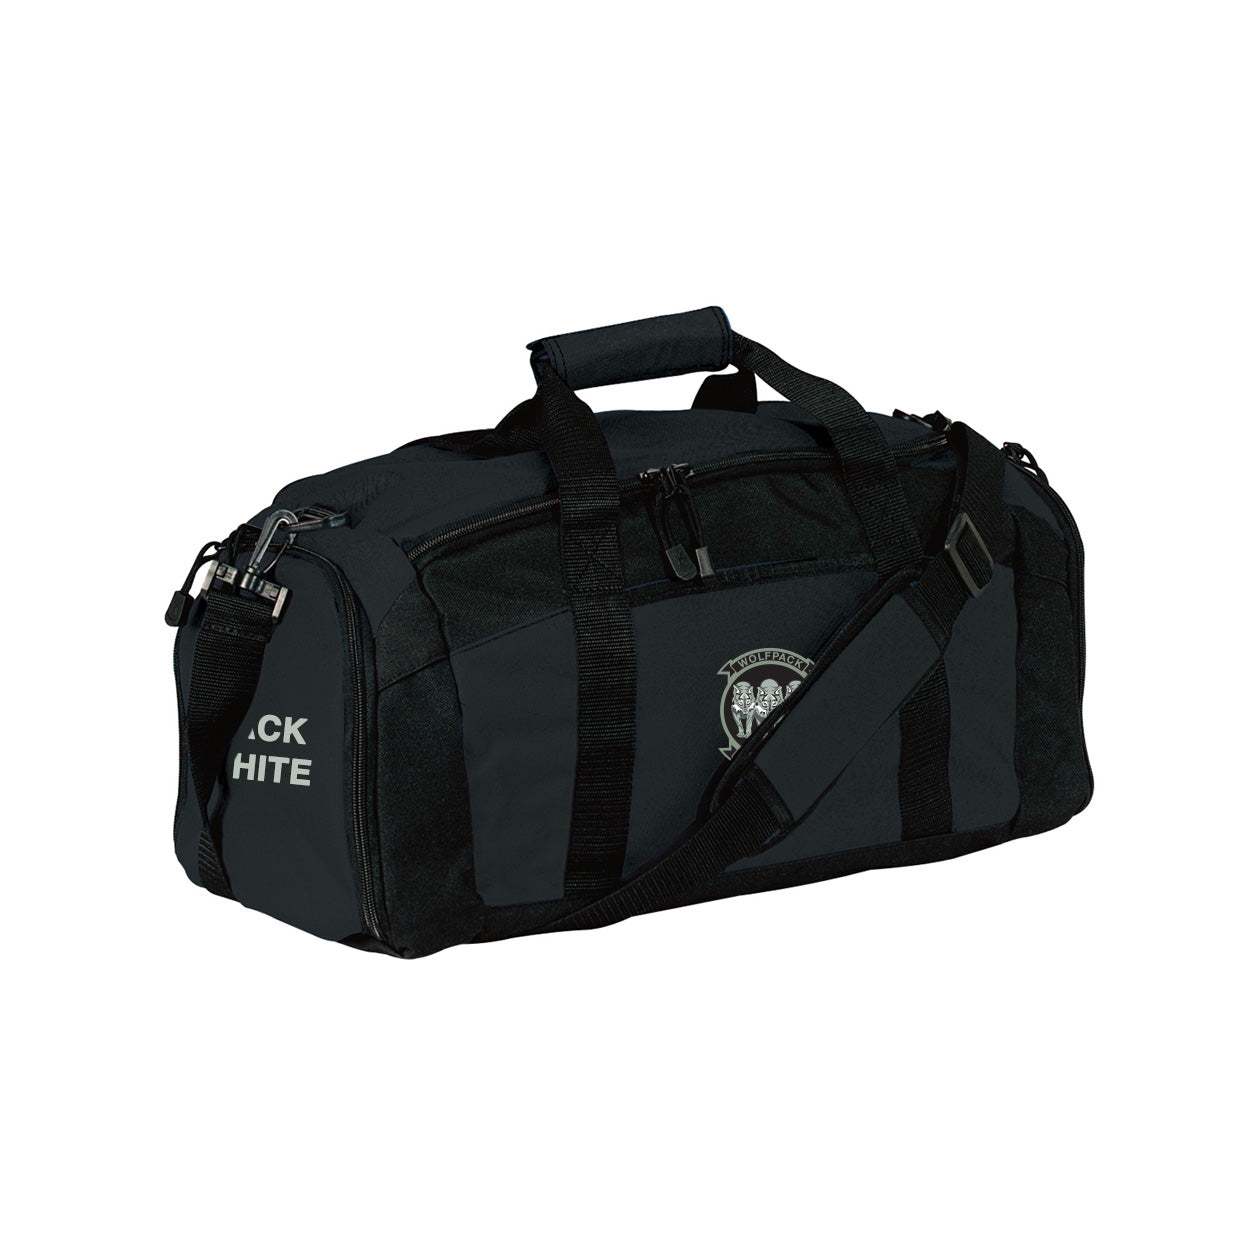 HMH-466 OFFICIAL PATCH EMBROIDERED PLAYER DUFFLE BAG